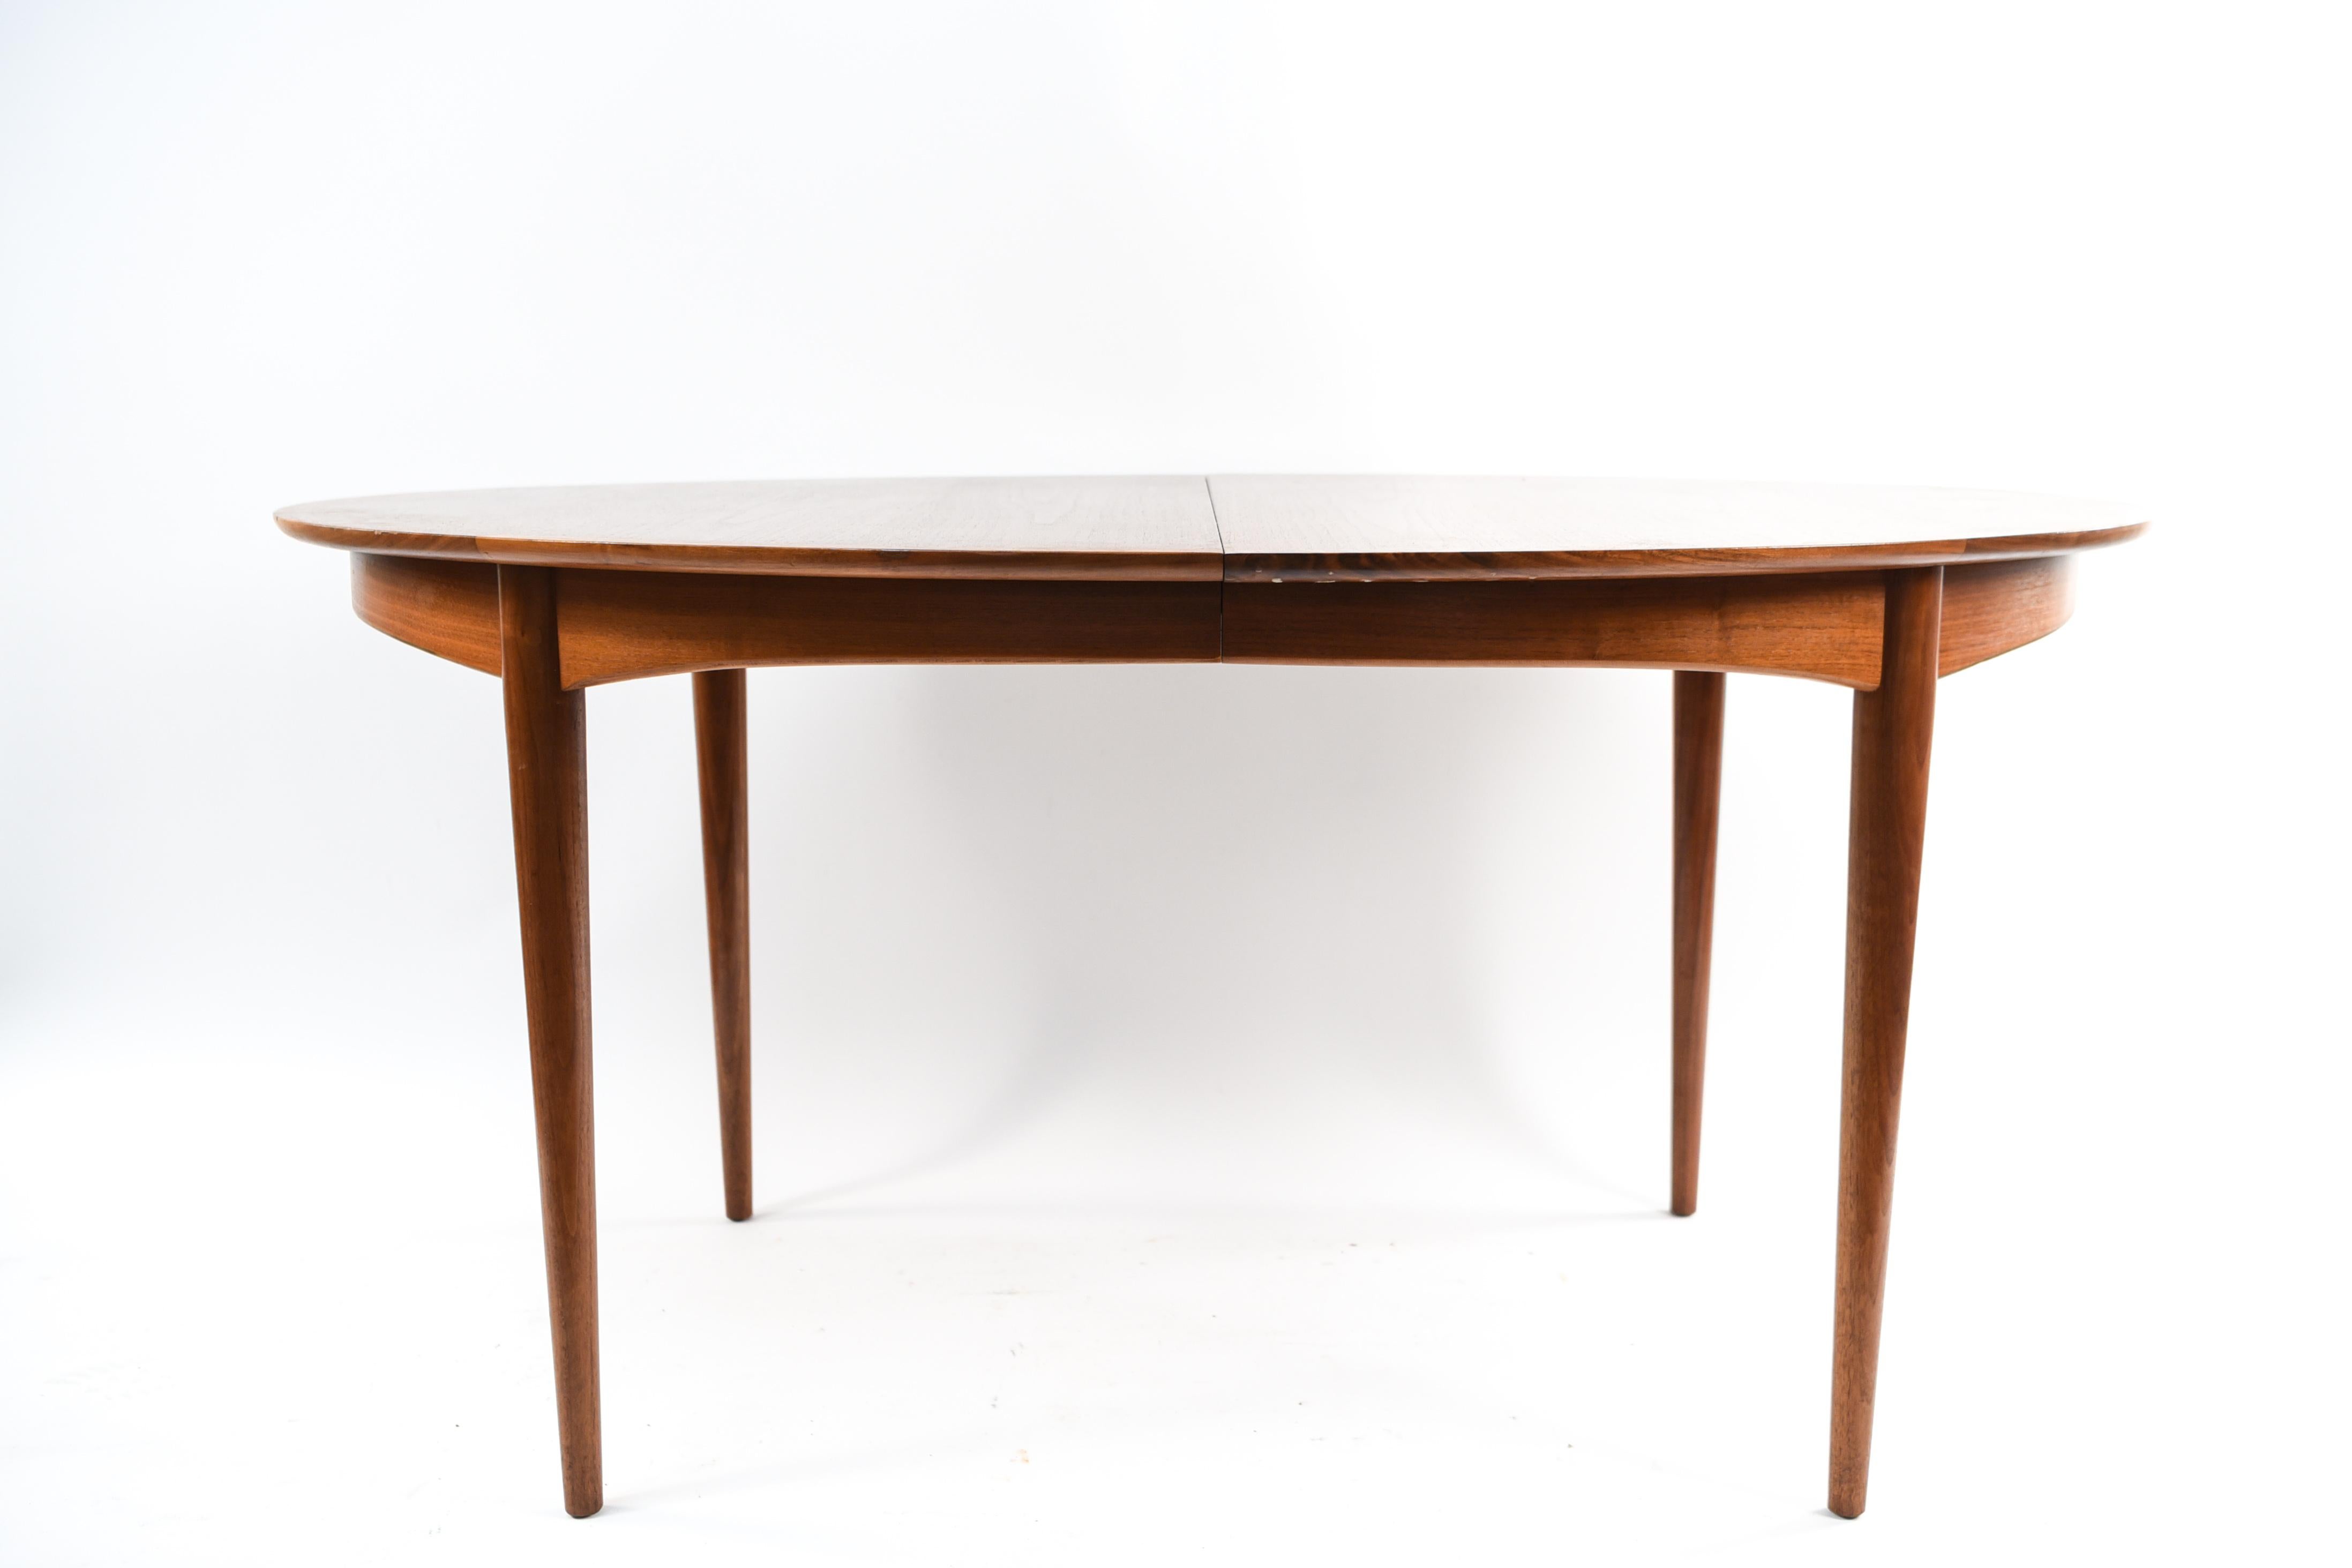 This attractive midcentury dining table includes two 18